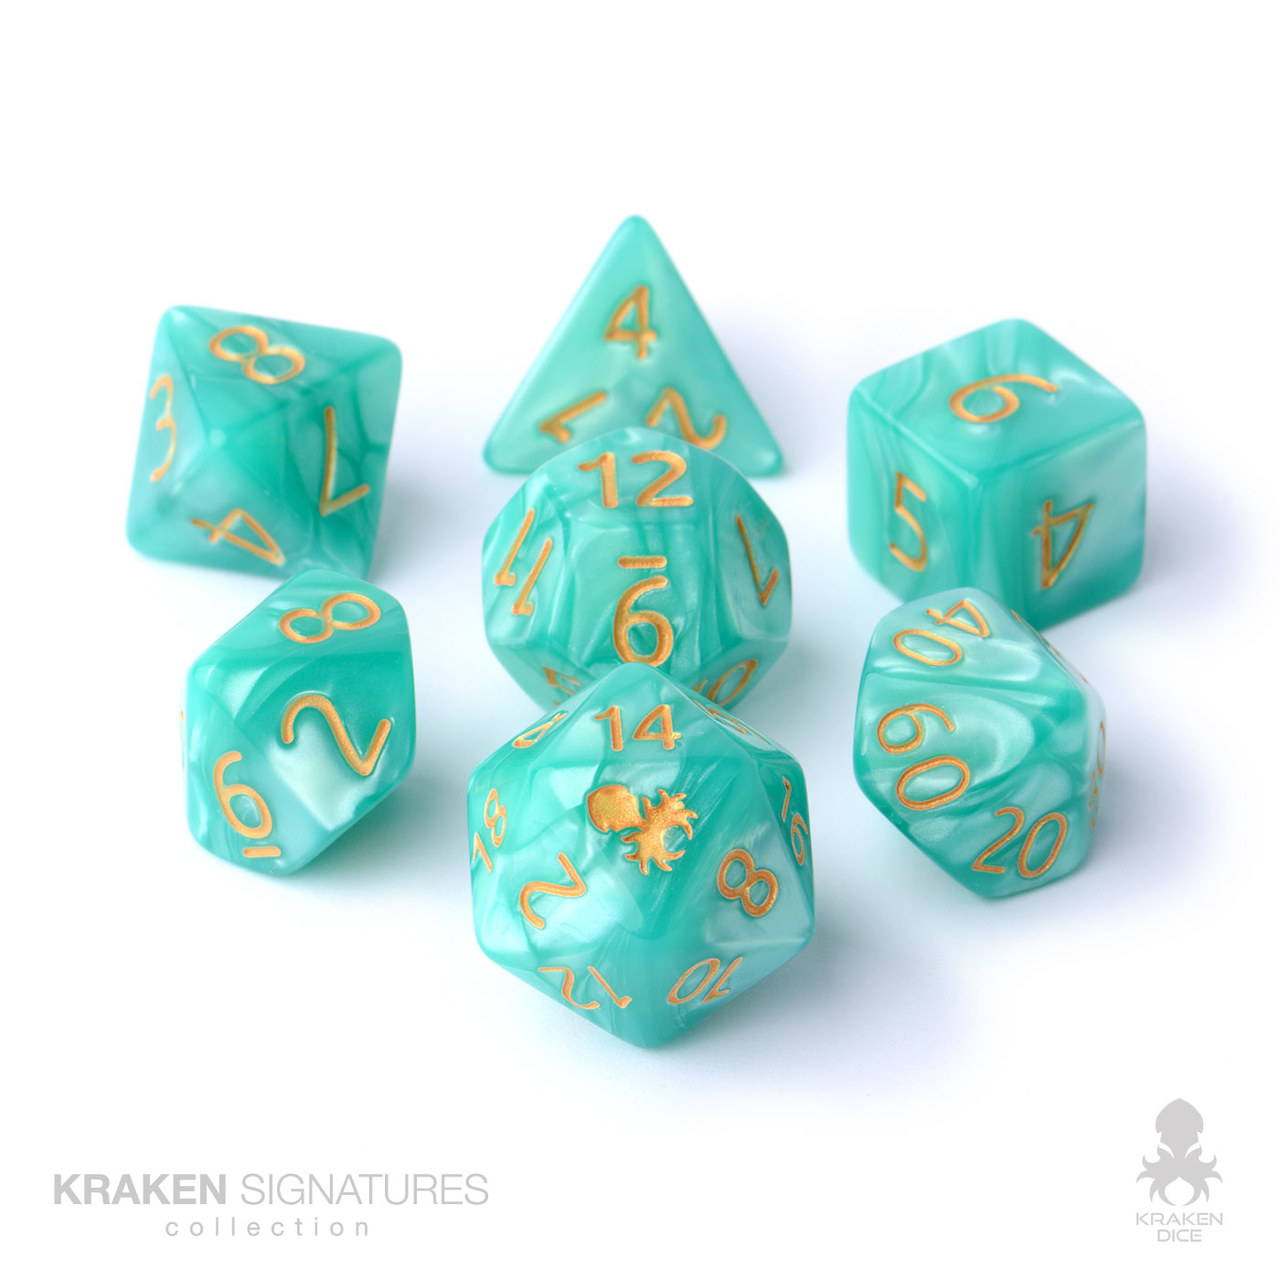 DND dice that are gold